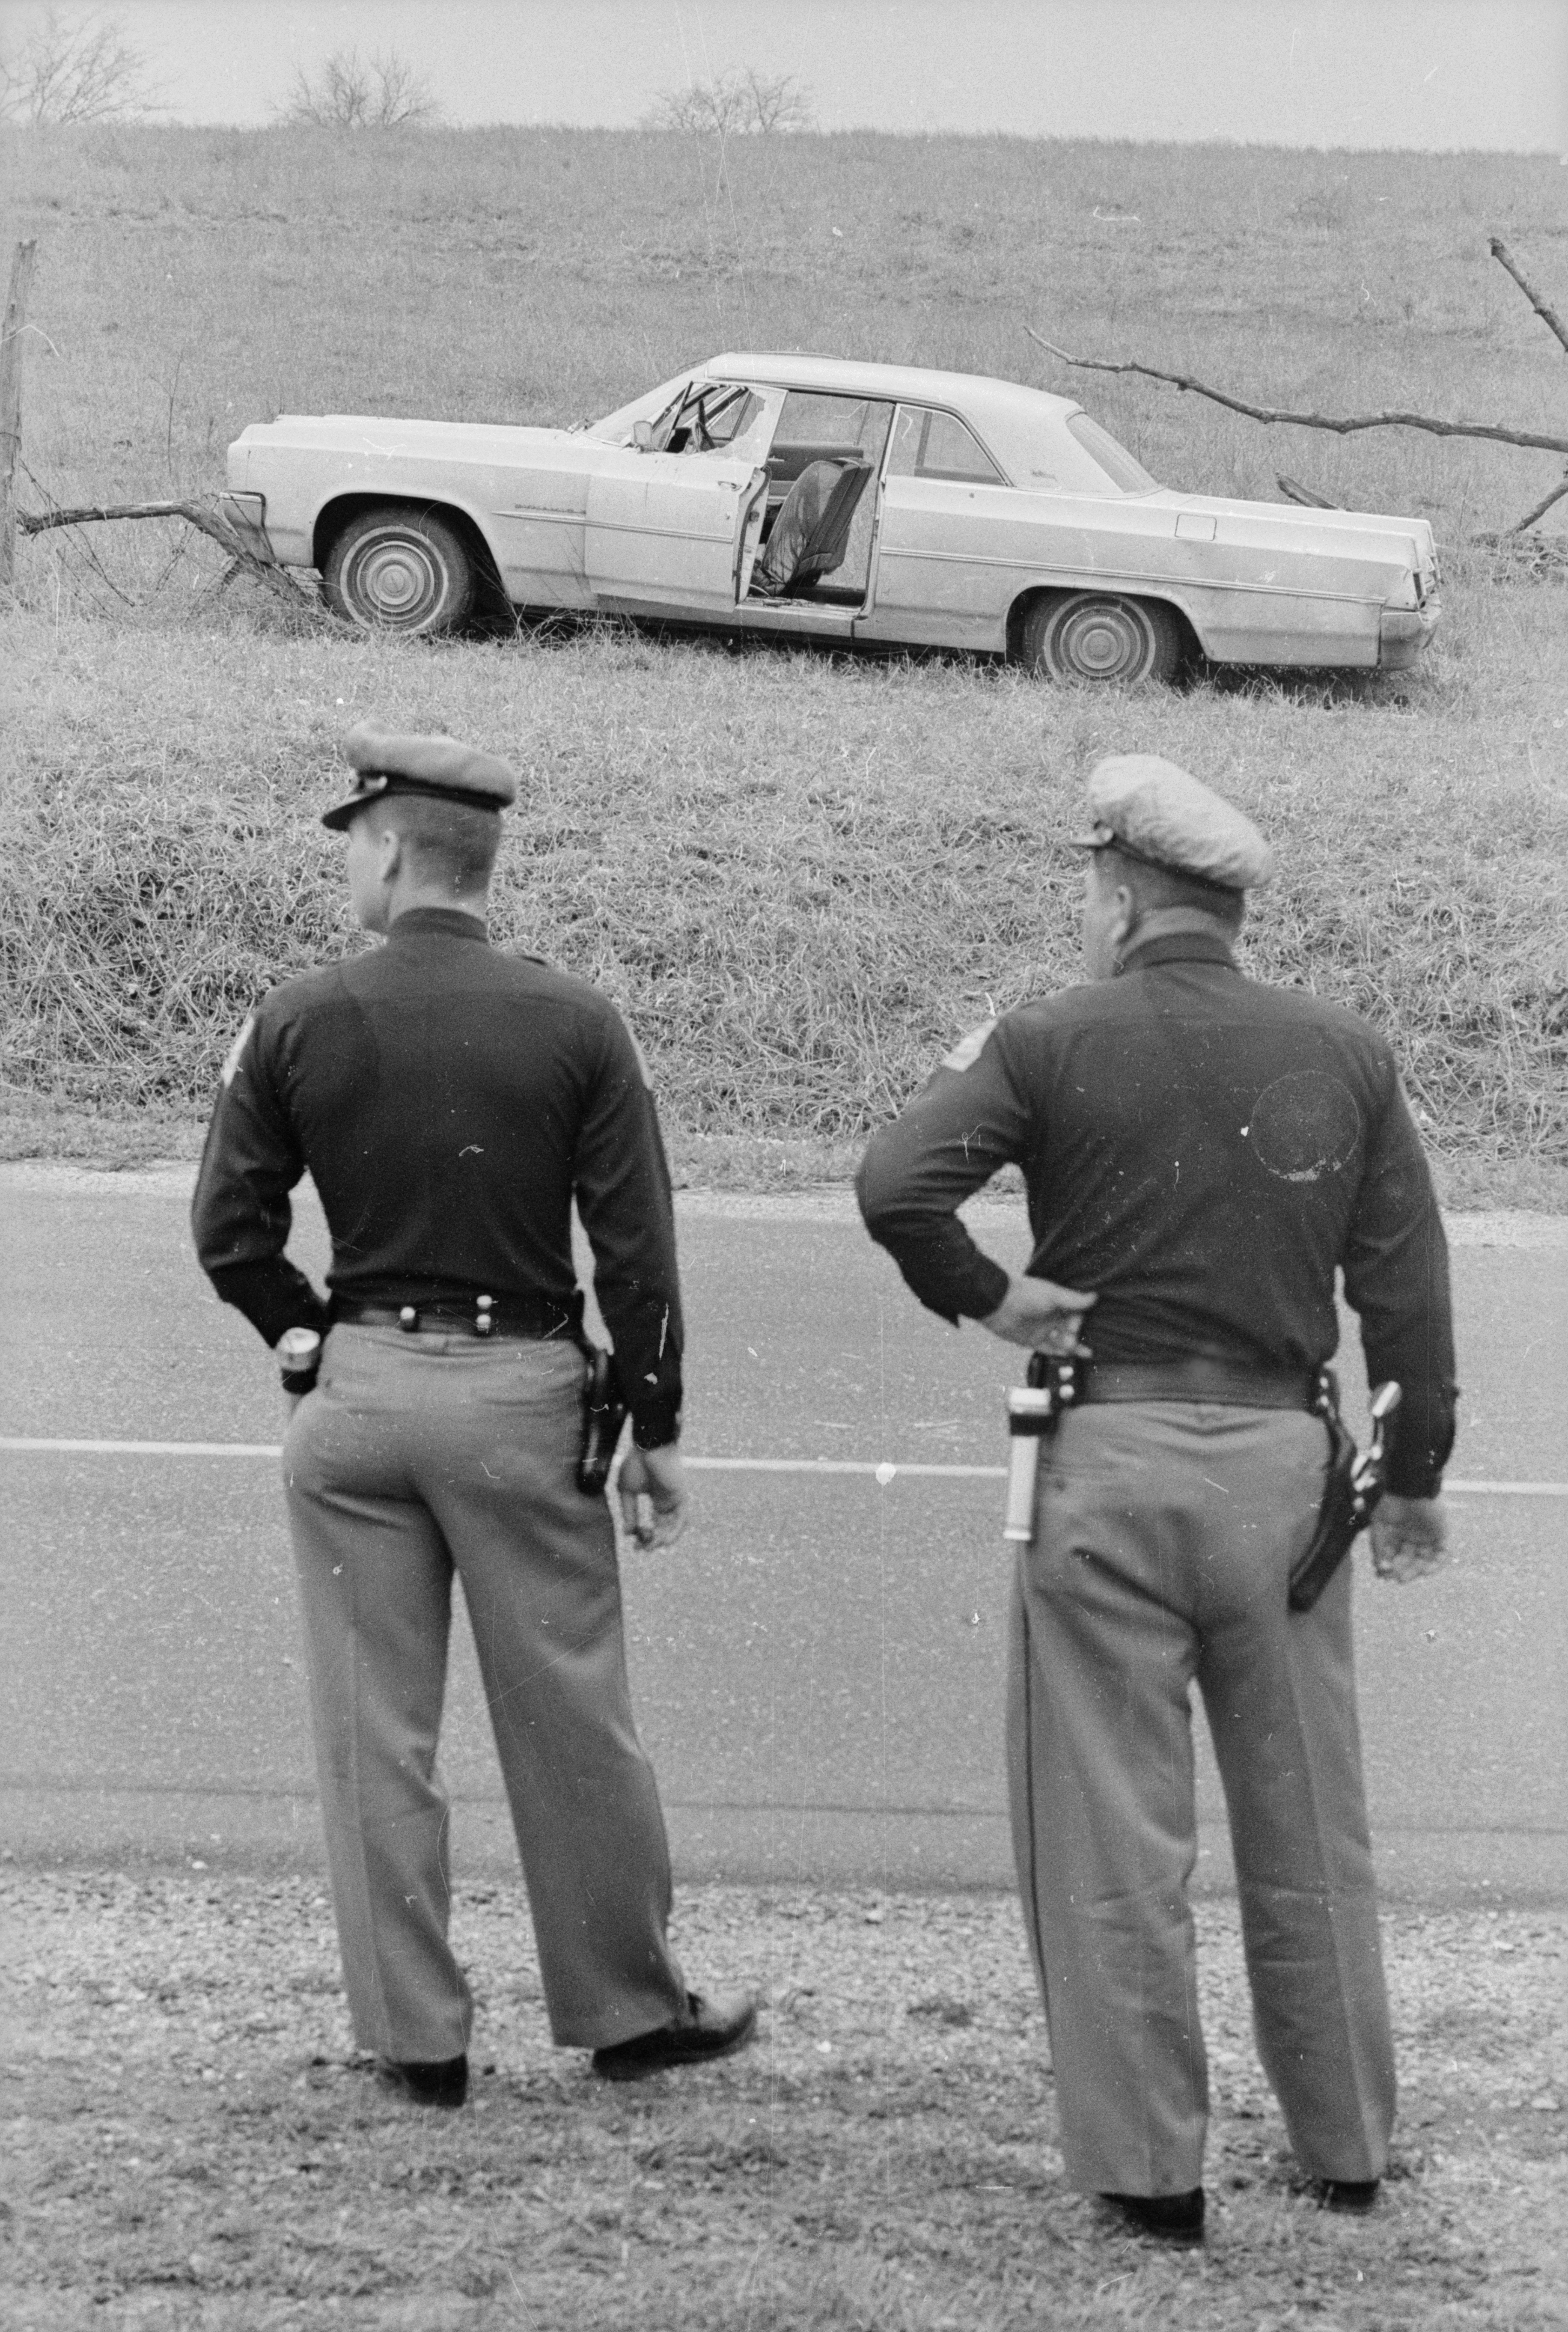 April 1, 1965:  Two Alabama state troopers standing over the road from the wreck of the car belonging to the murdered Detroit housewife, Viola Liuzzo, who was killed by a group of Ku Klux Klansmen after having taken part in a civil rights march from Selma to Montgomery.  (Photo by William Lovelace/Express/Getty Images)